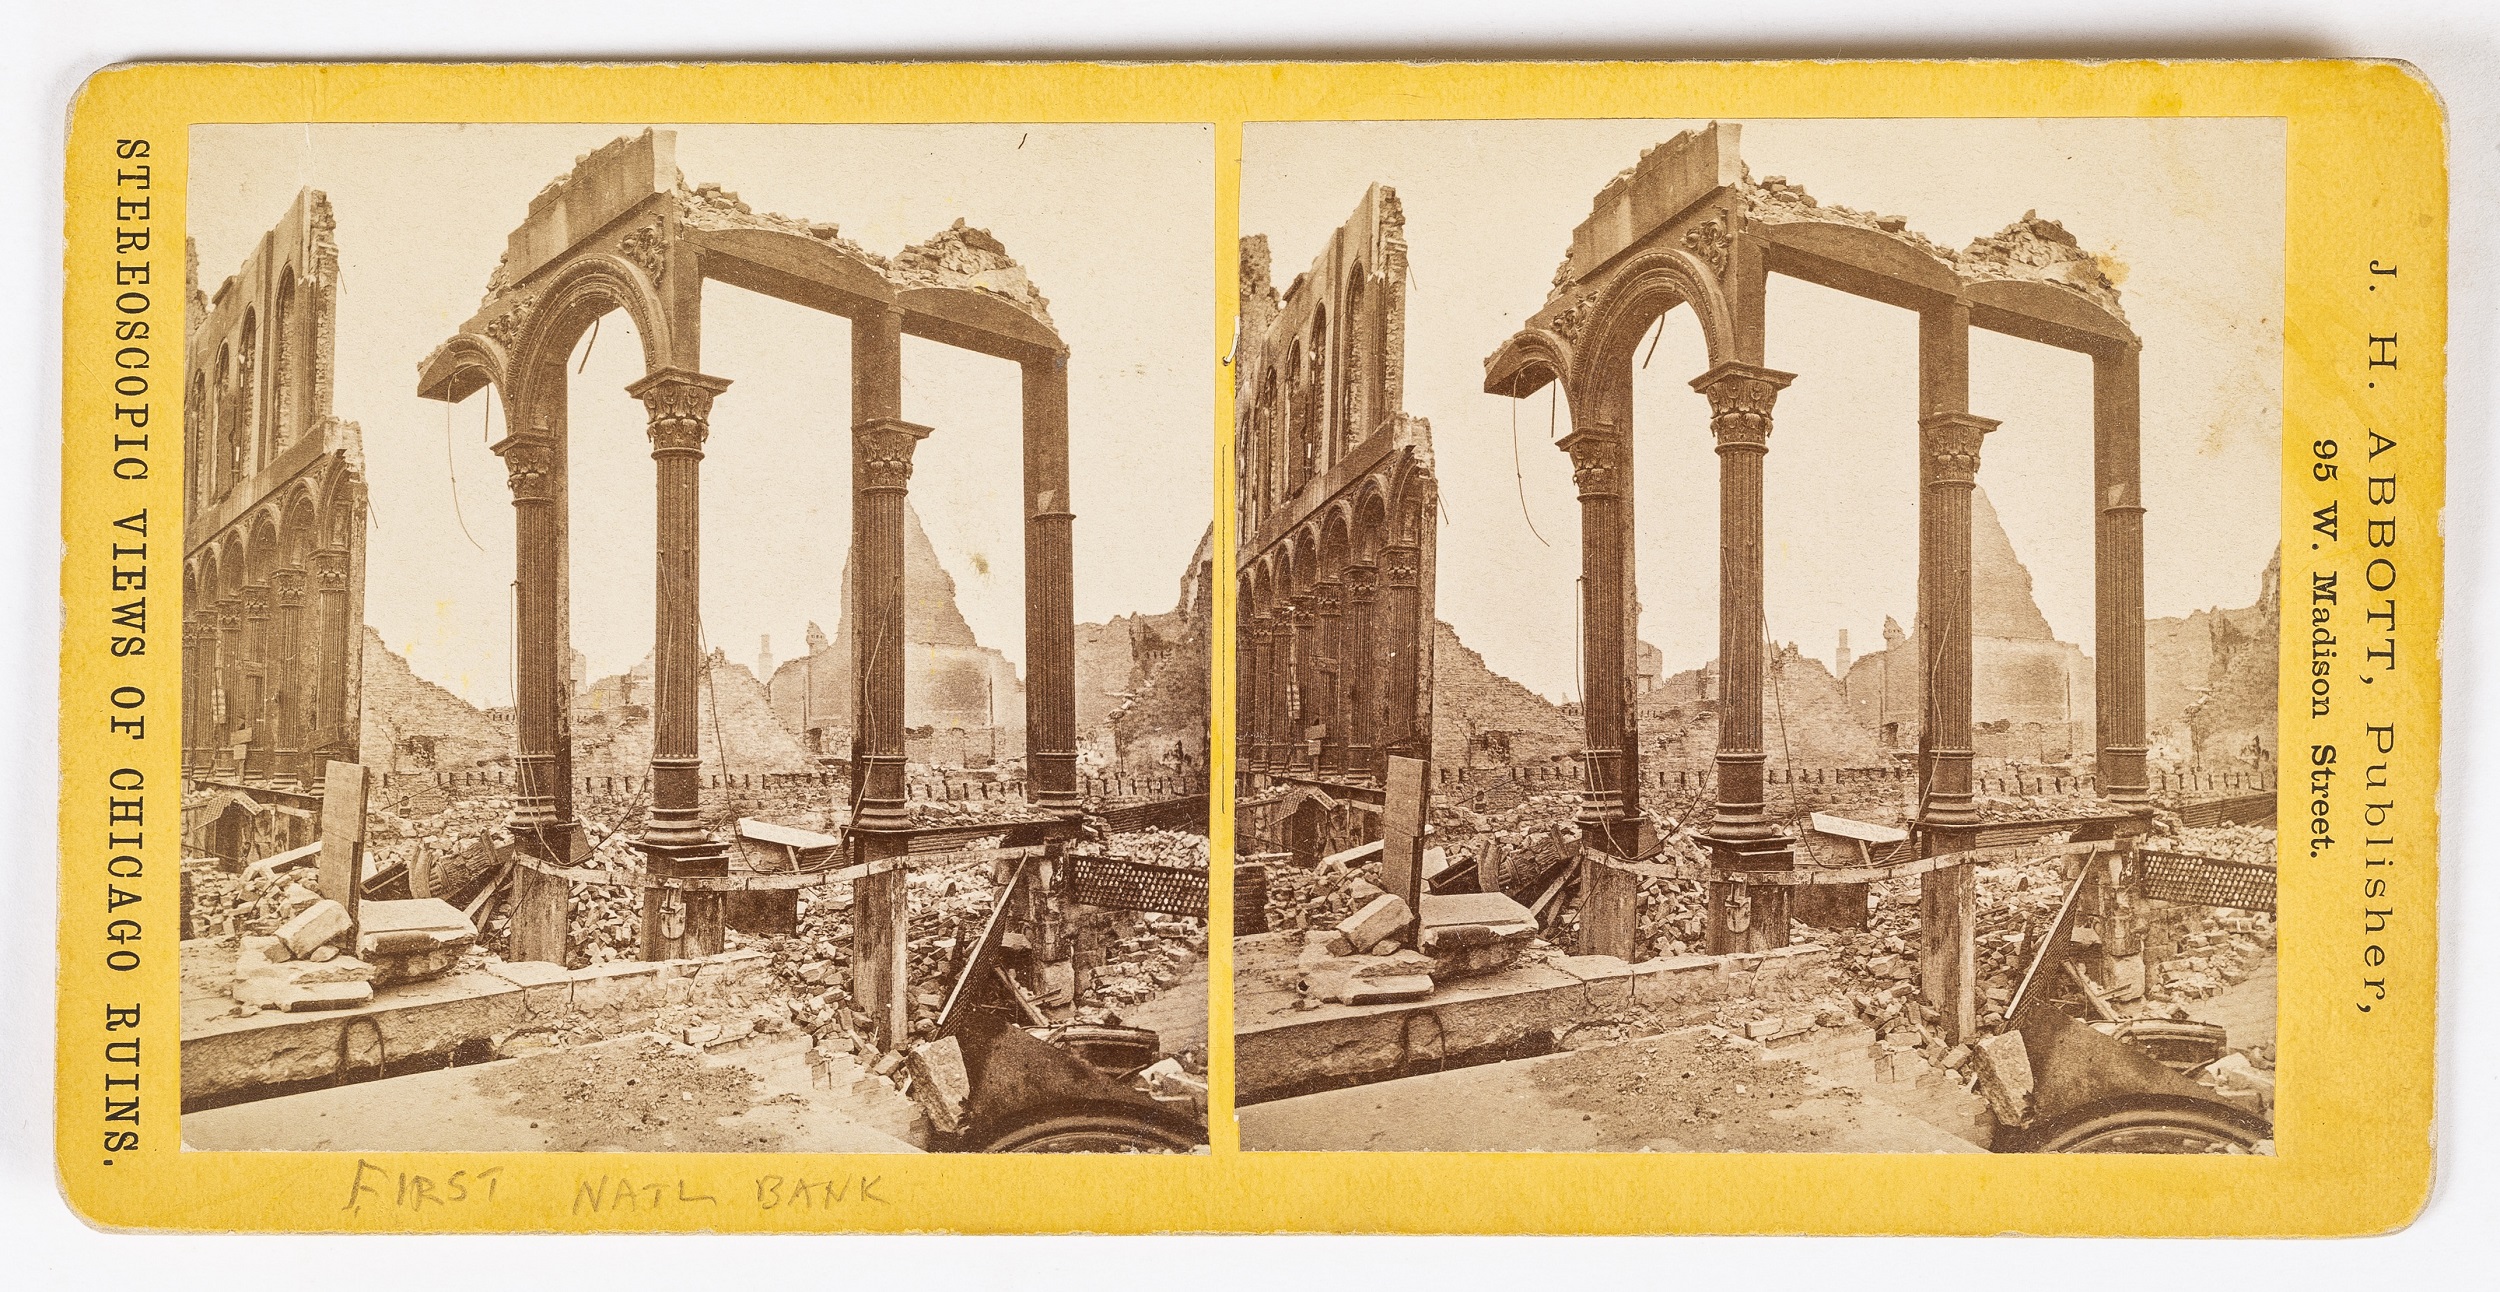 Photographic stereoview of a building ruined by fire